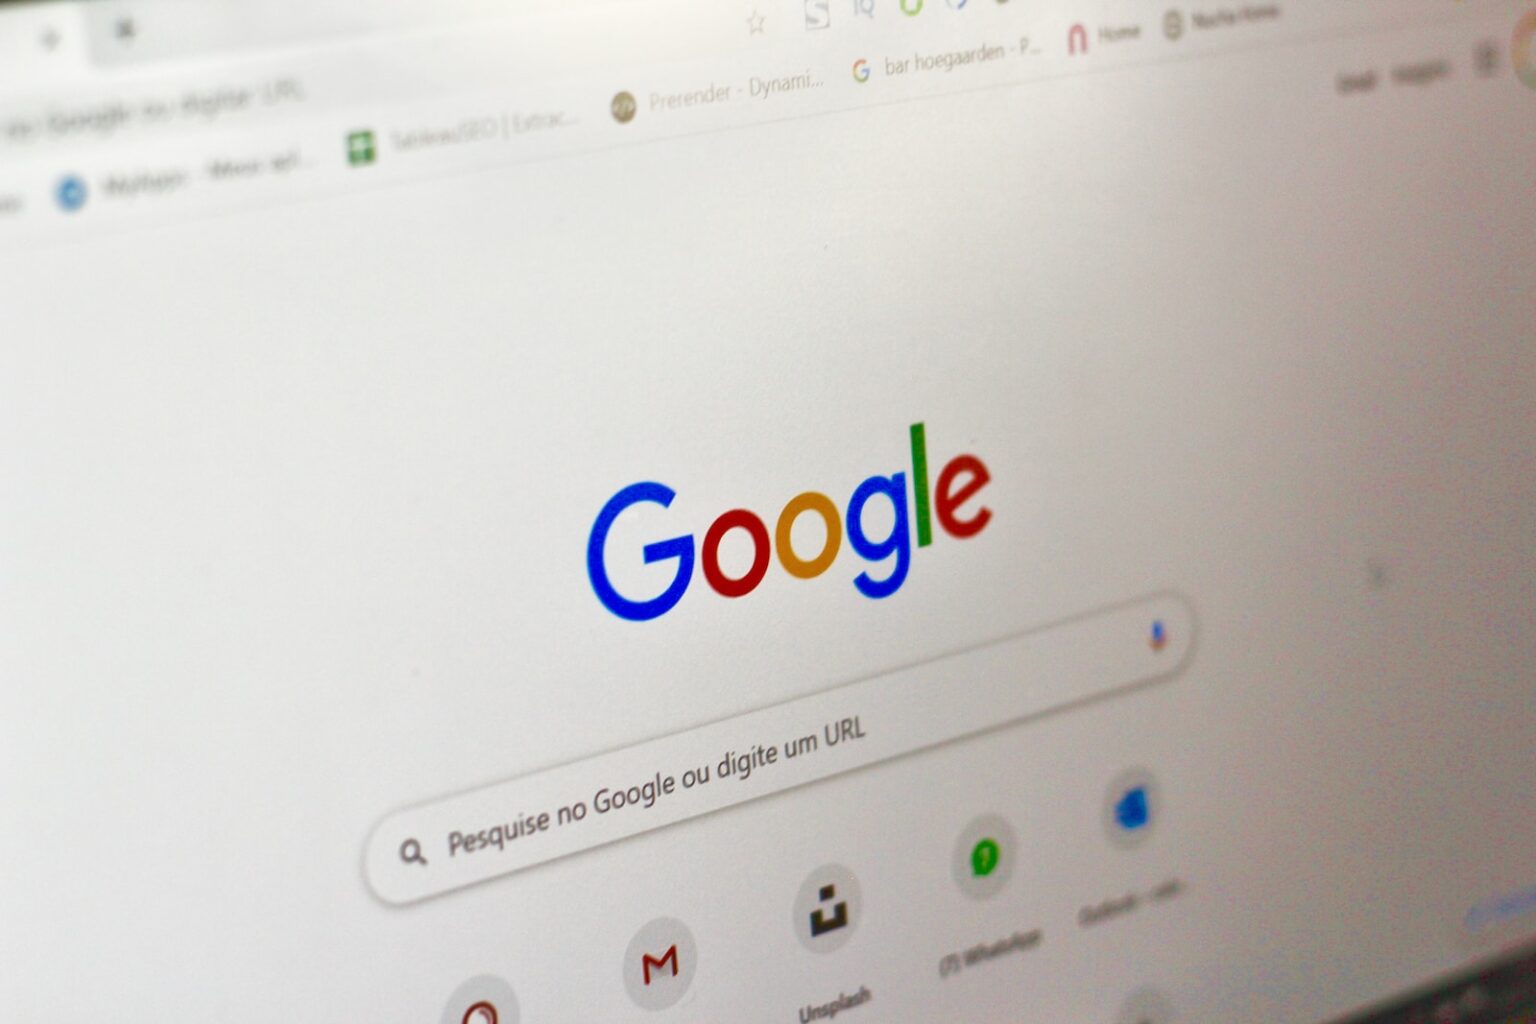 Google's Advertising Practices Questioned: Report Reveals Potential Mislead 